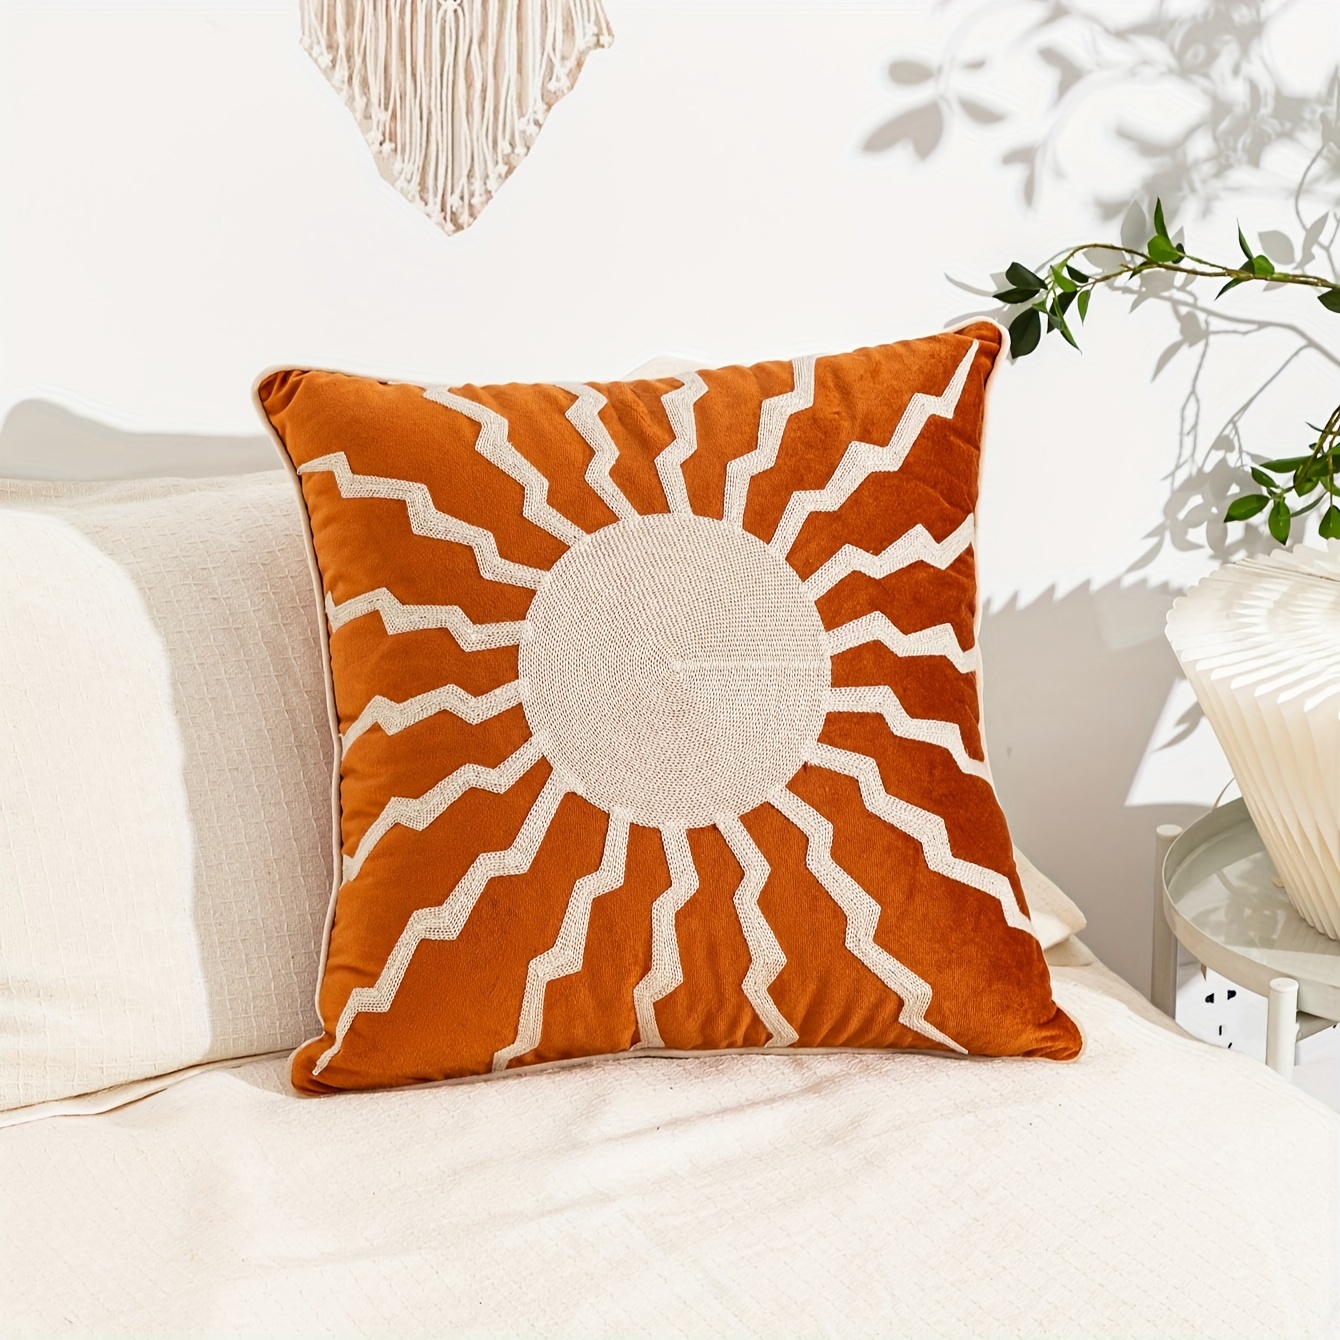 

1pc, Sunburst Chain Embroidered Throw Pillow Cover, 18x18 Inches, Modern Scandinavian, Vibrant Orange, Cushion Case For Office Chair, Sofa, Living Room Decor, Contemporary Style